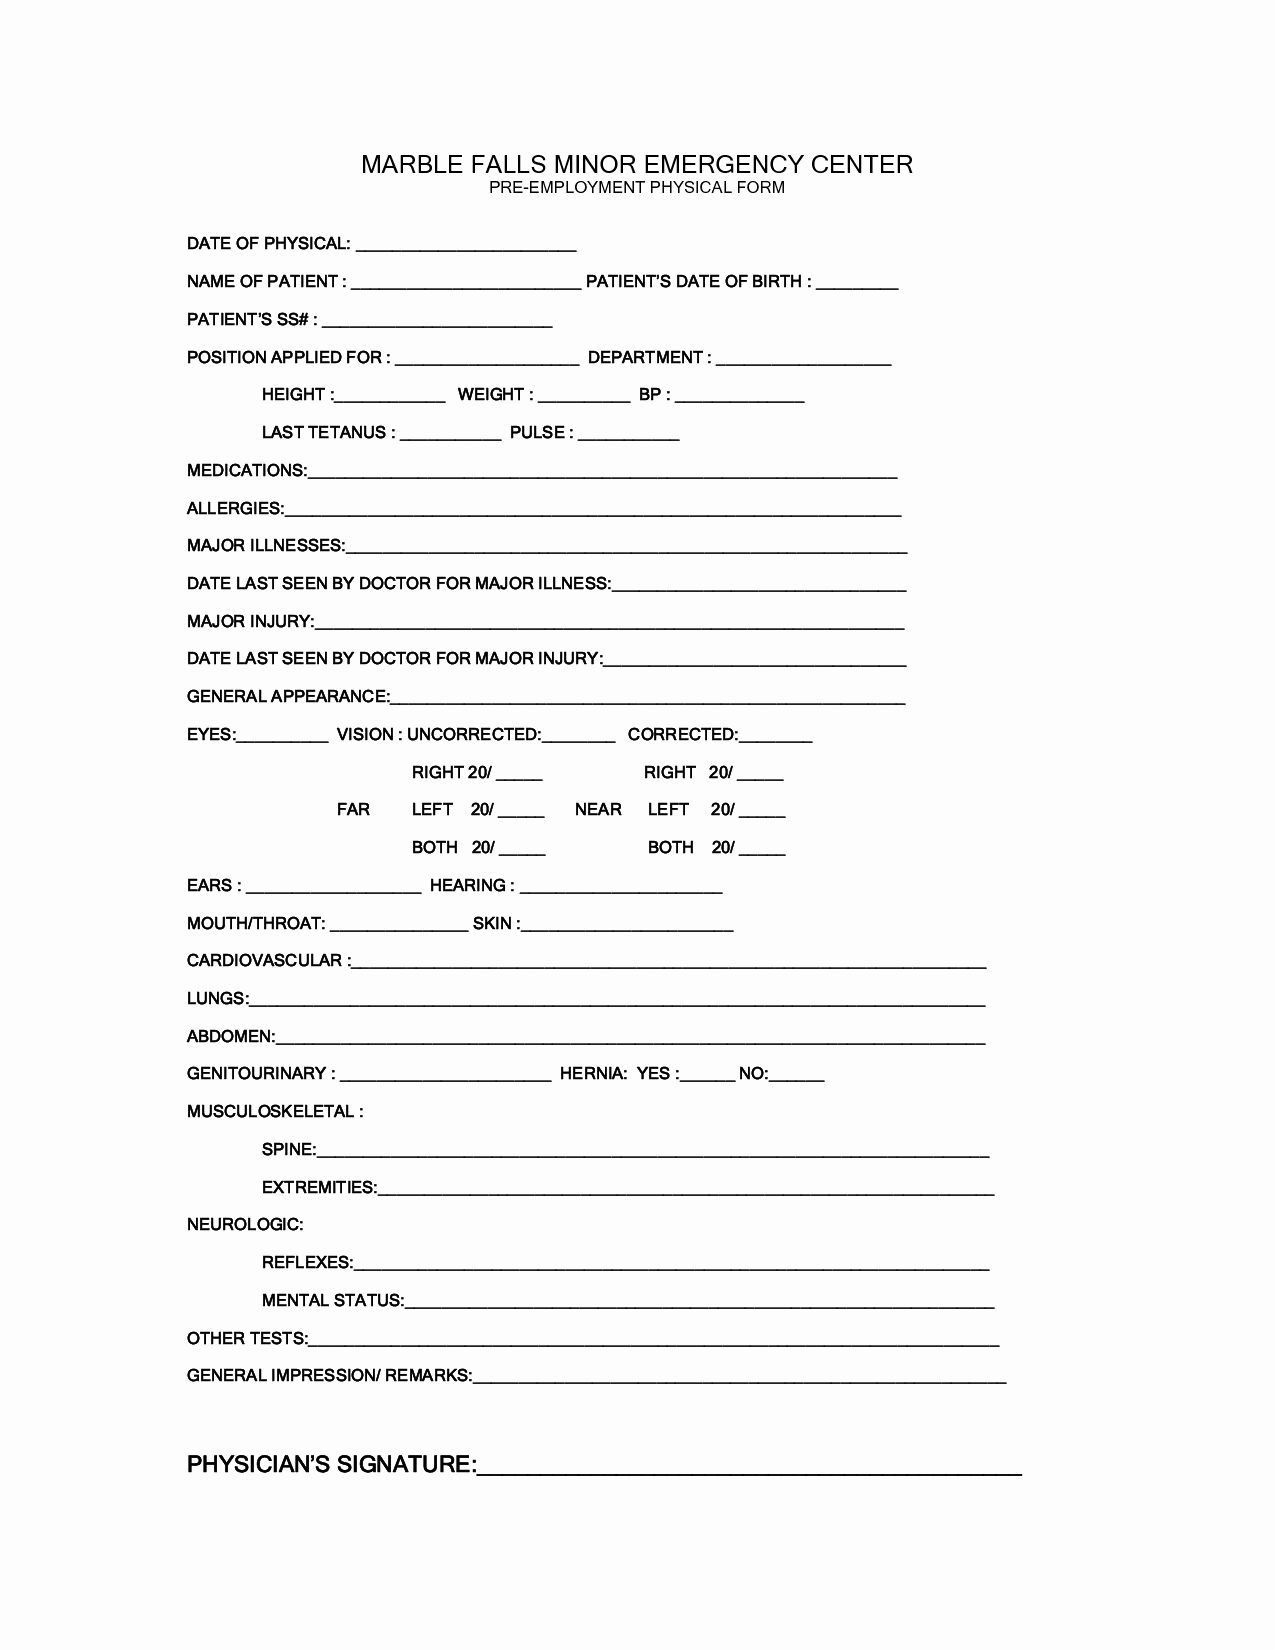 Employee Physical Exam form Template Lovely Work Physical Exam Blank form Bing Images